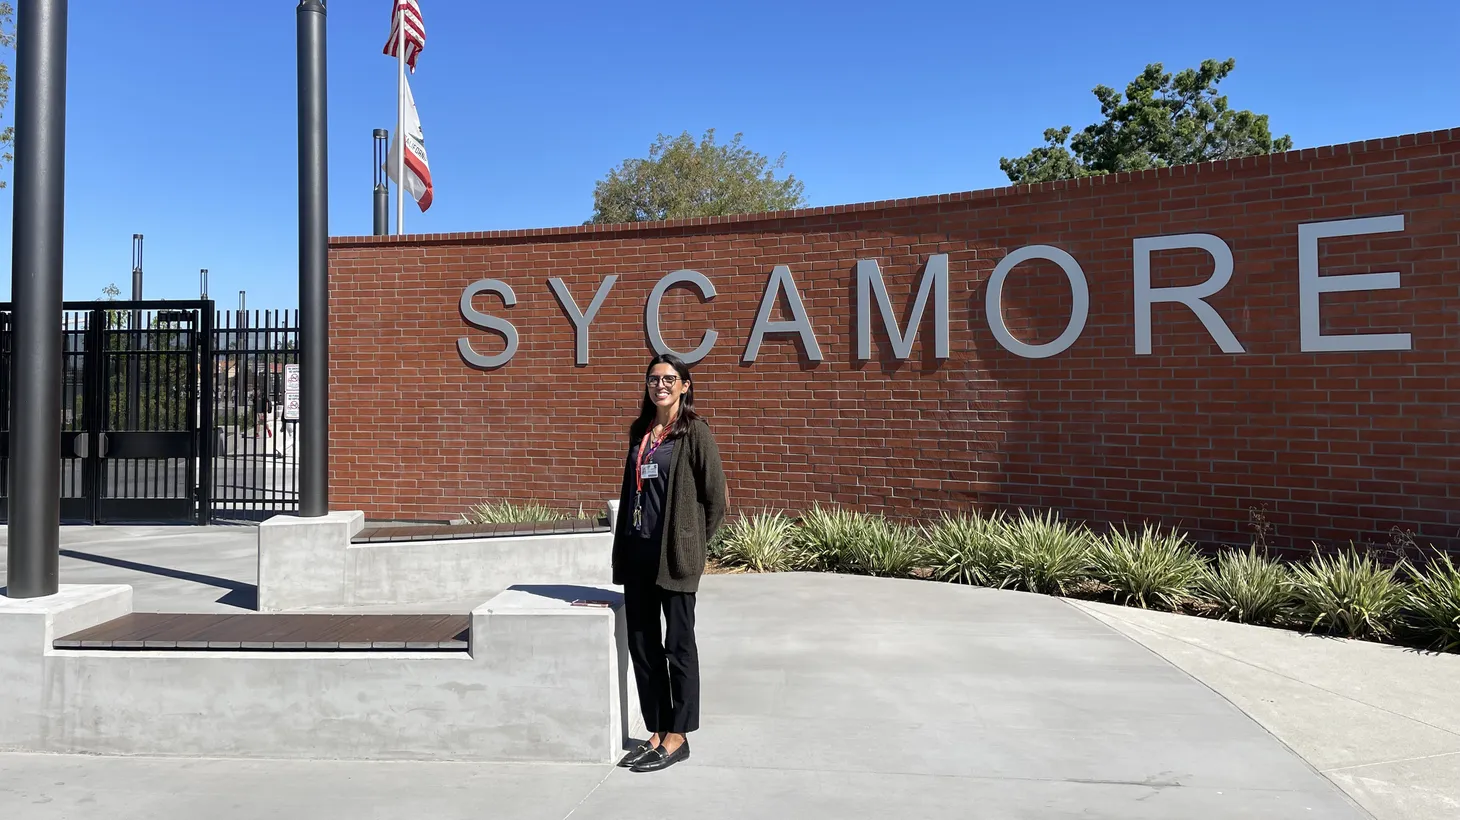 Araceli Huerta, community school coordinator at Sycamore Junior High School, aims to understand students’ lives outside of academia in order to help them achieve more.